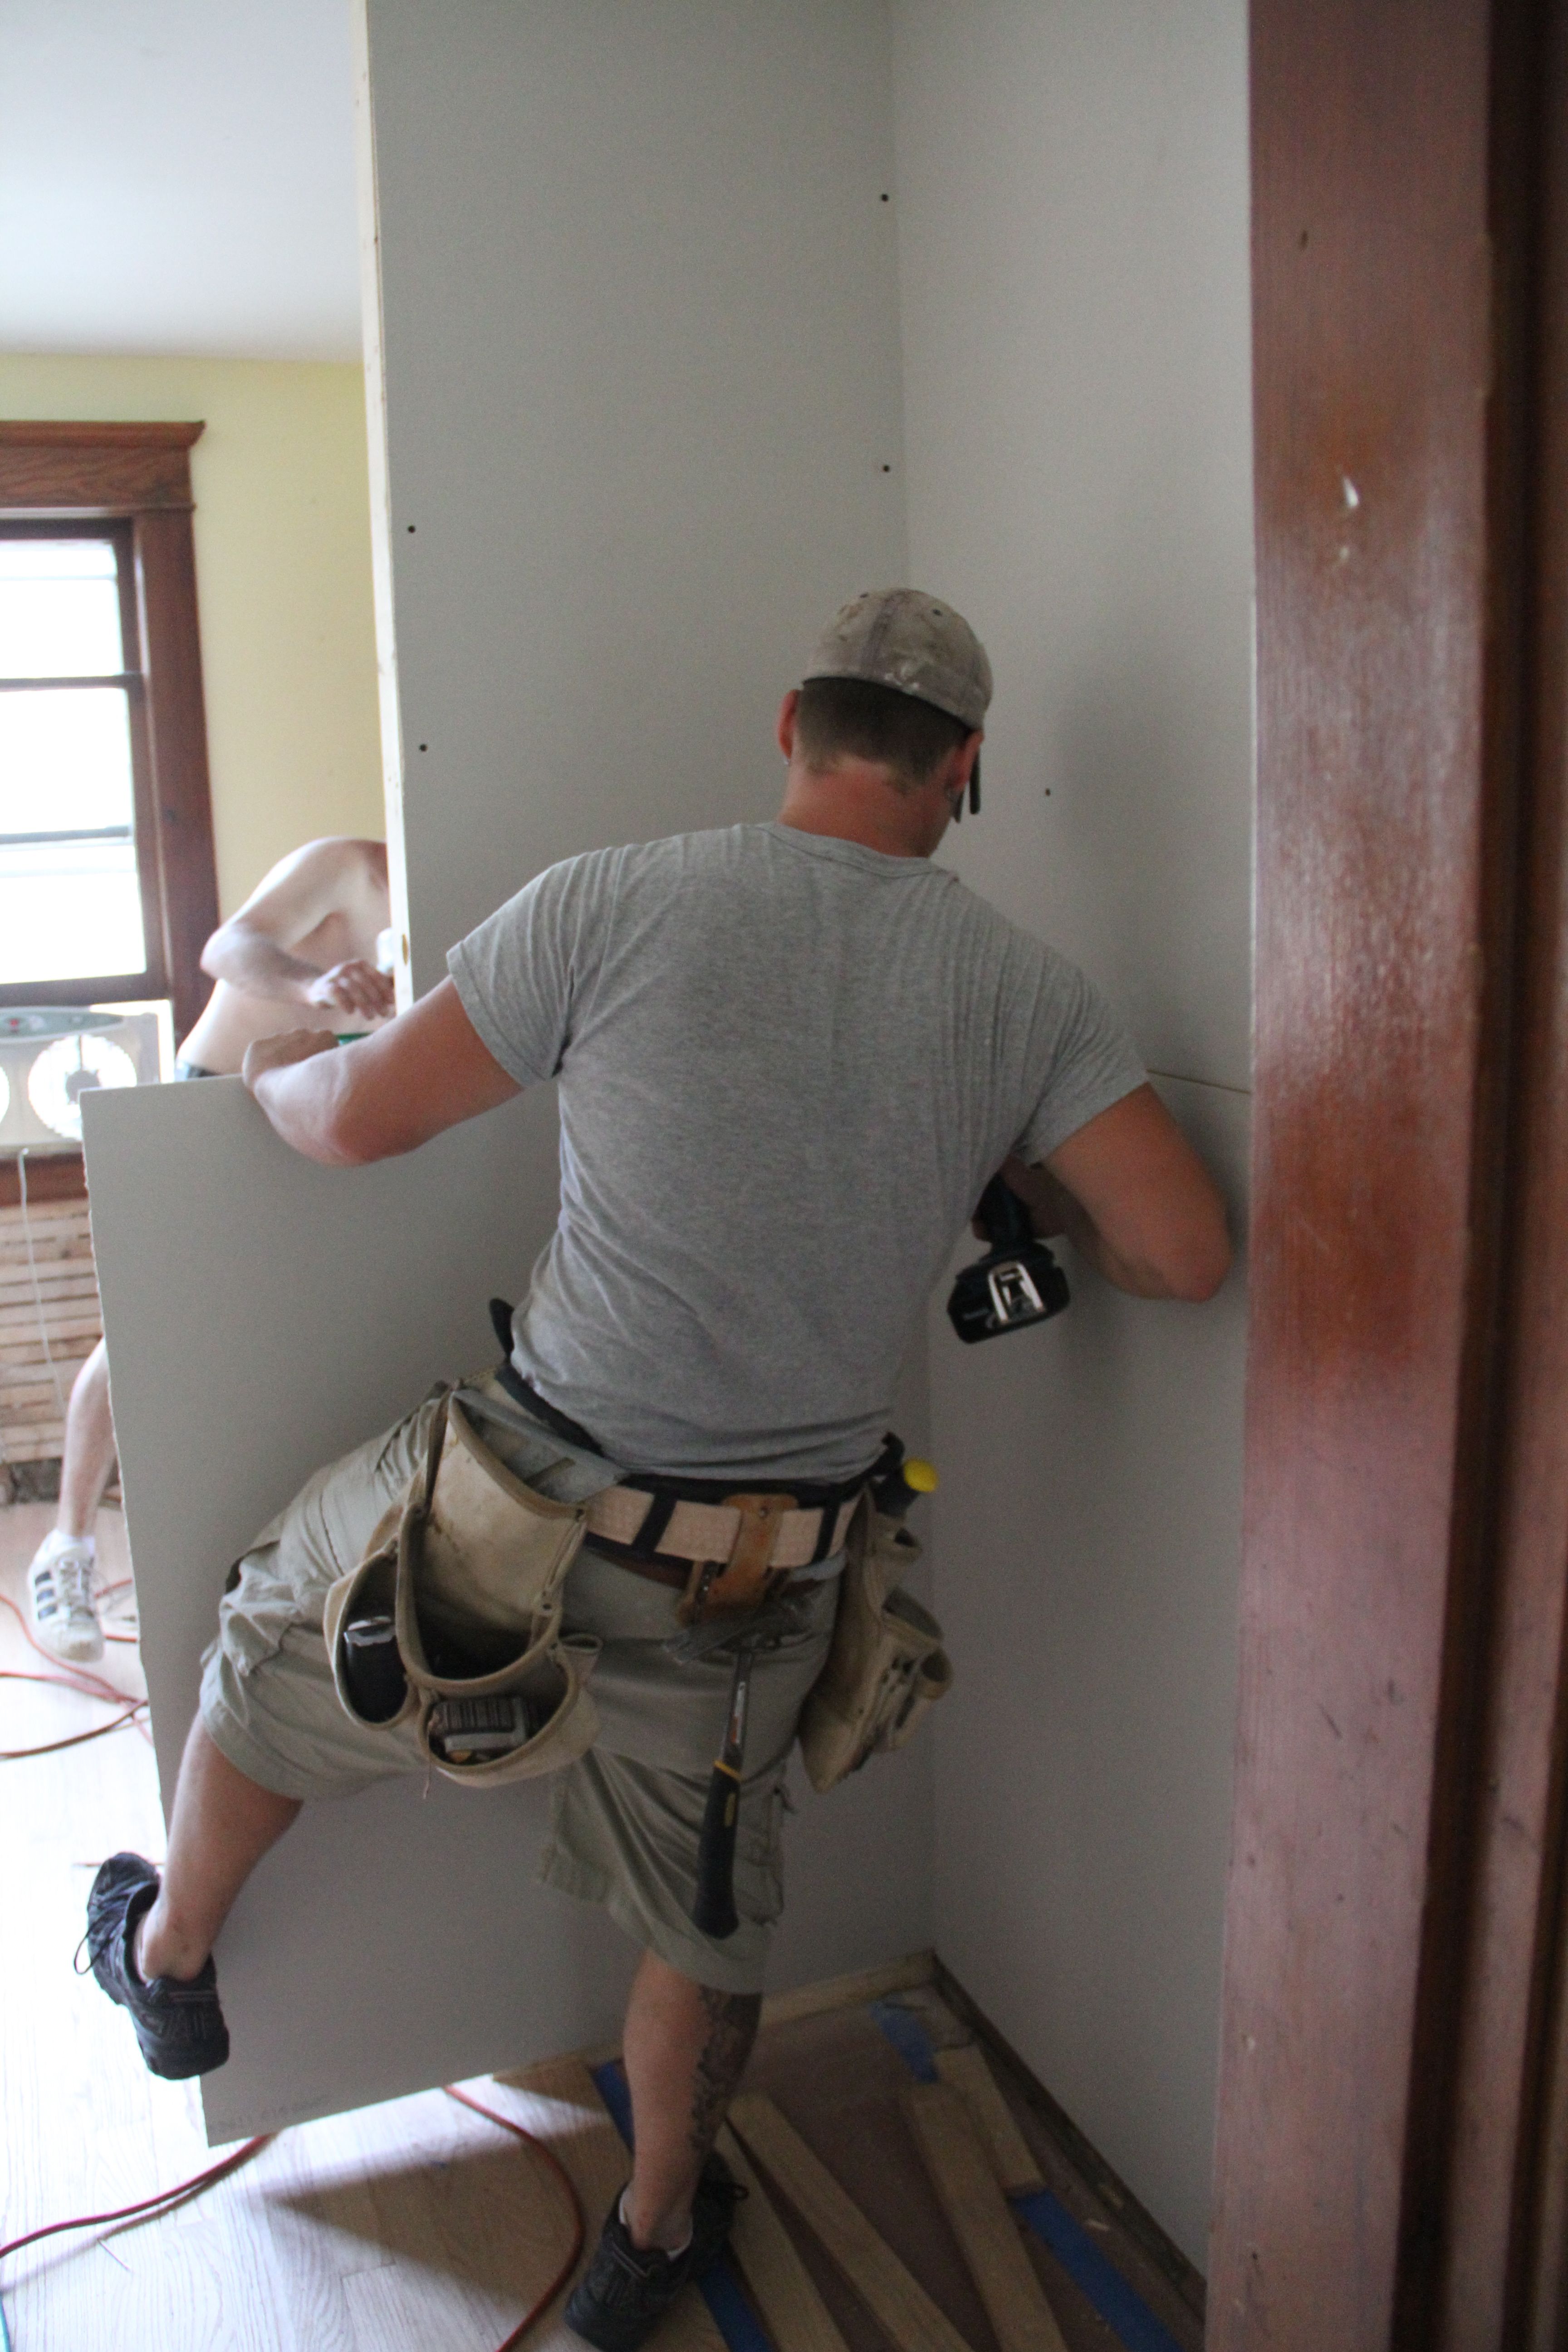 Sheetrock installation requires your entire body. Don't let anyone tell you different.